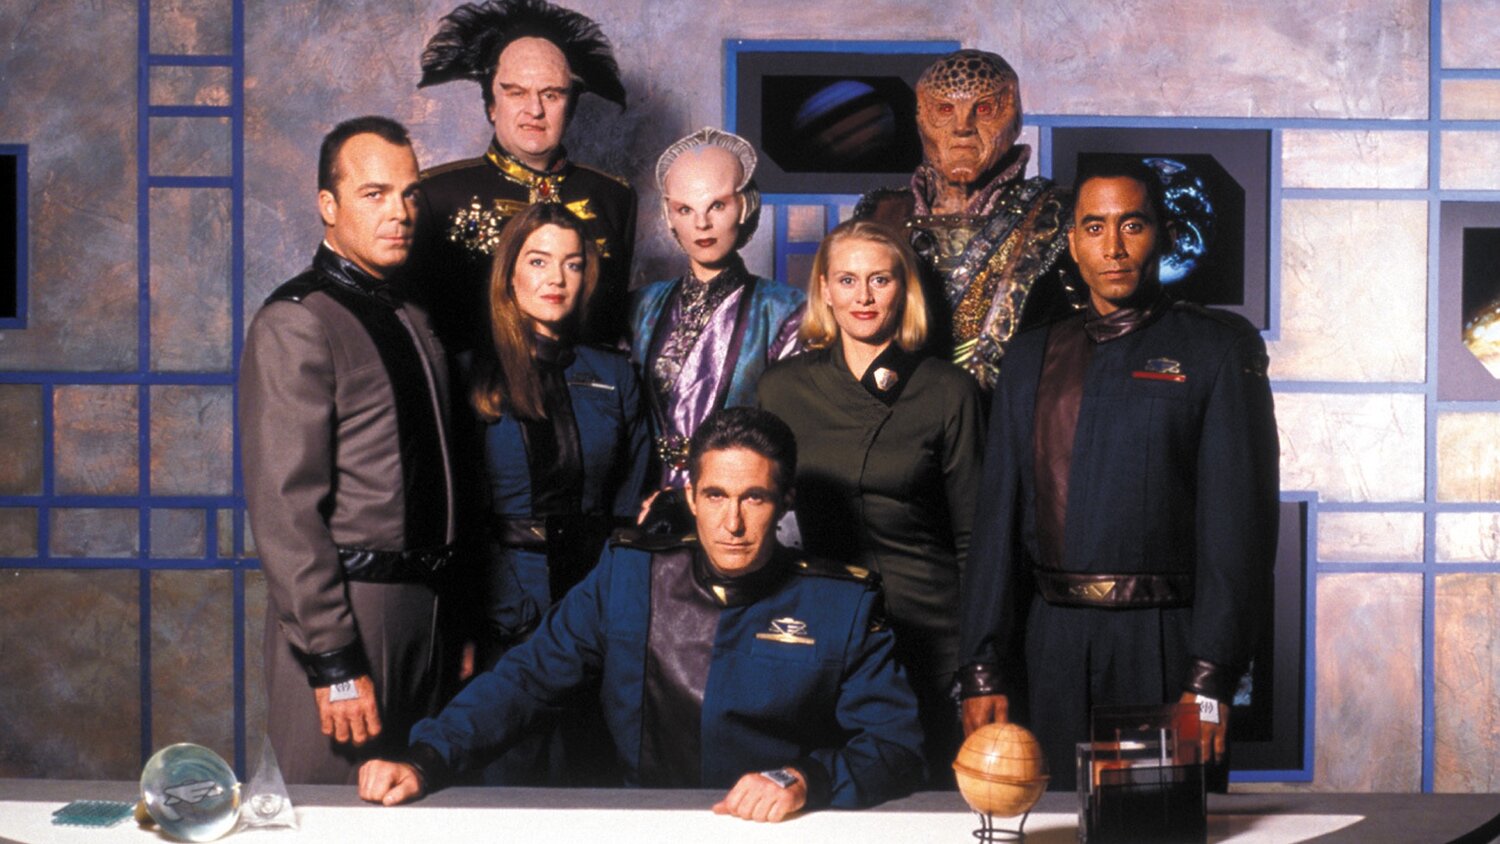 BABYLON 5 is Being Rebooted For The CW